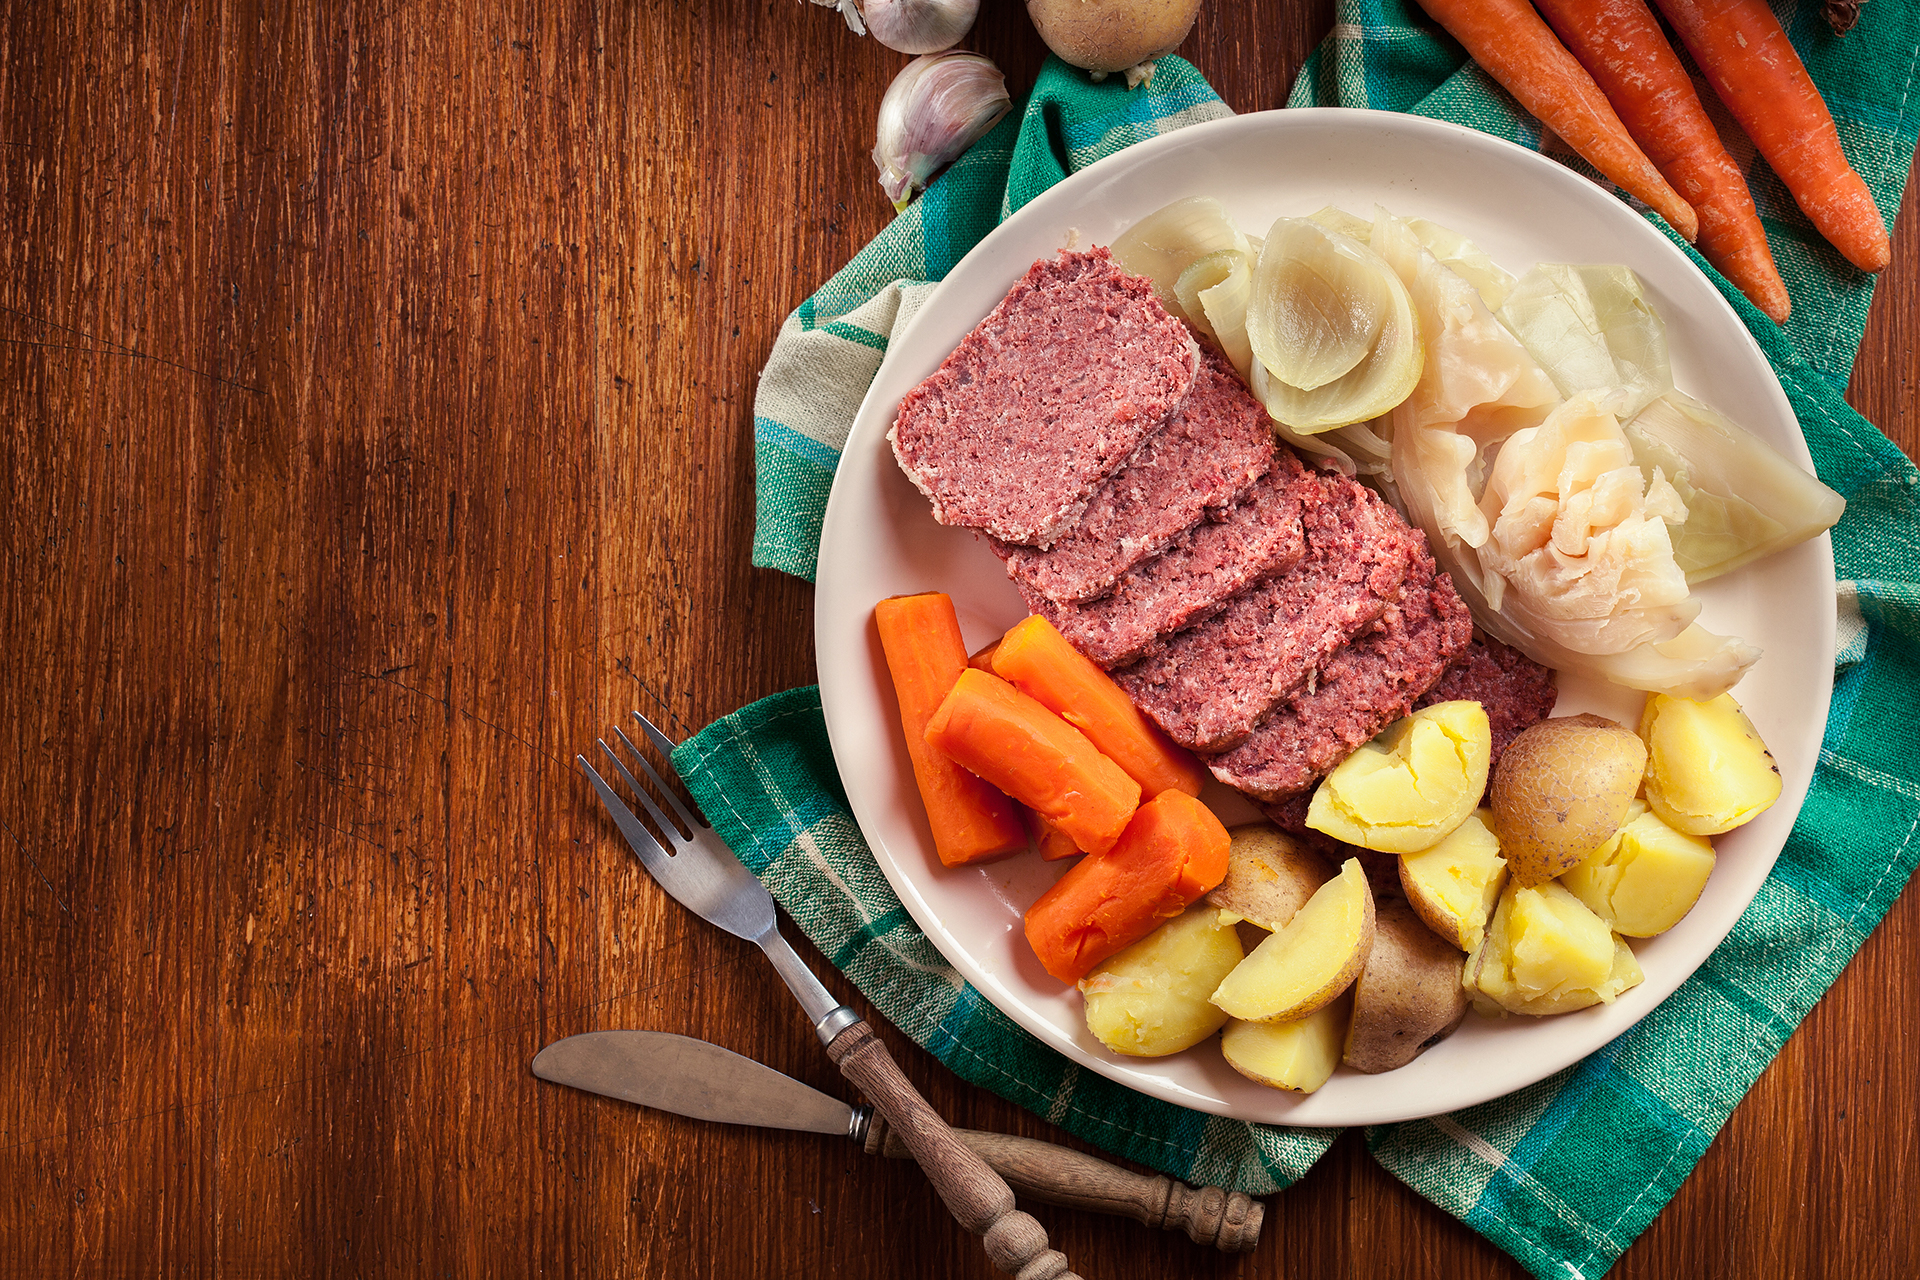 Corned beef and cabbage with potatoes and carrots on St Patrick's Day